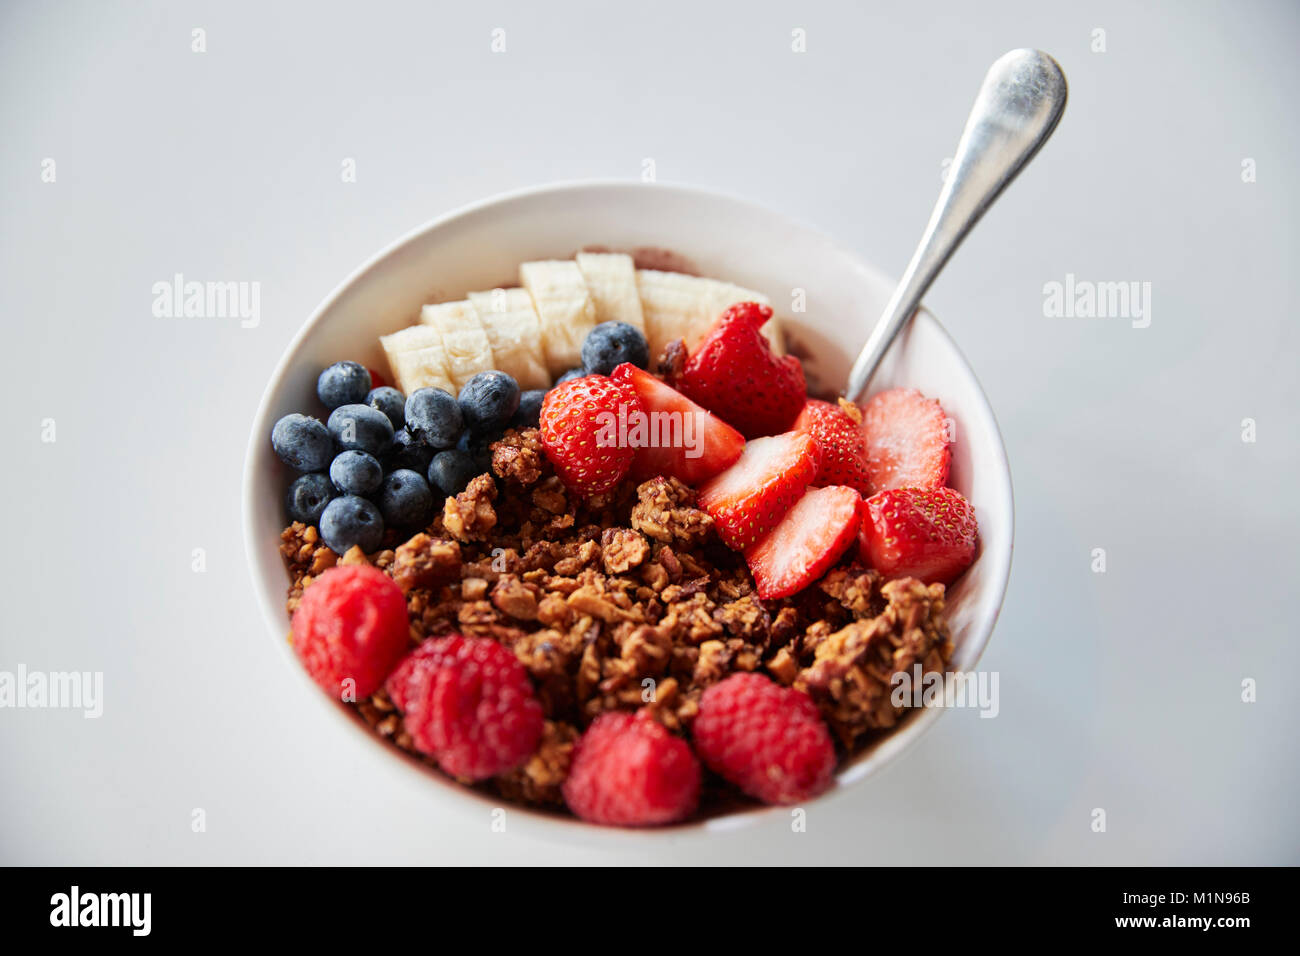 Bowl Of Granola And Fresh Fruit For Healthy Breakfast Stock Photo